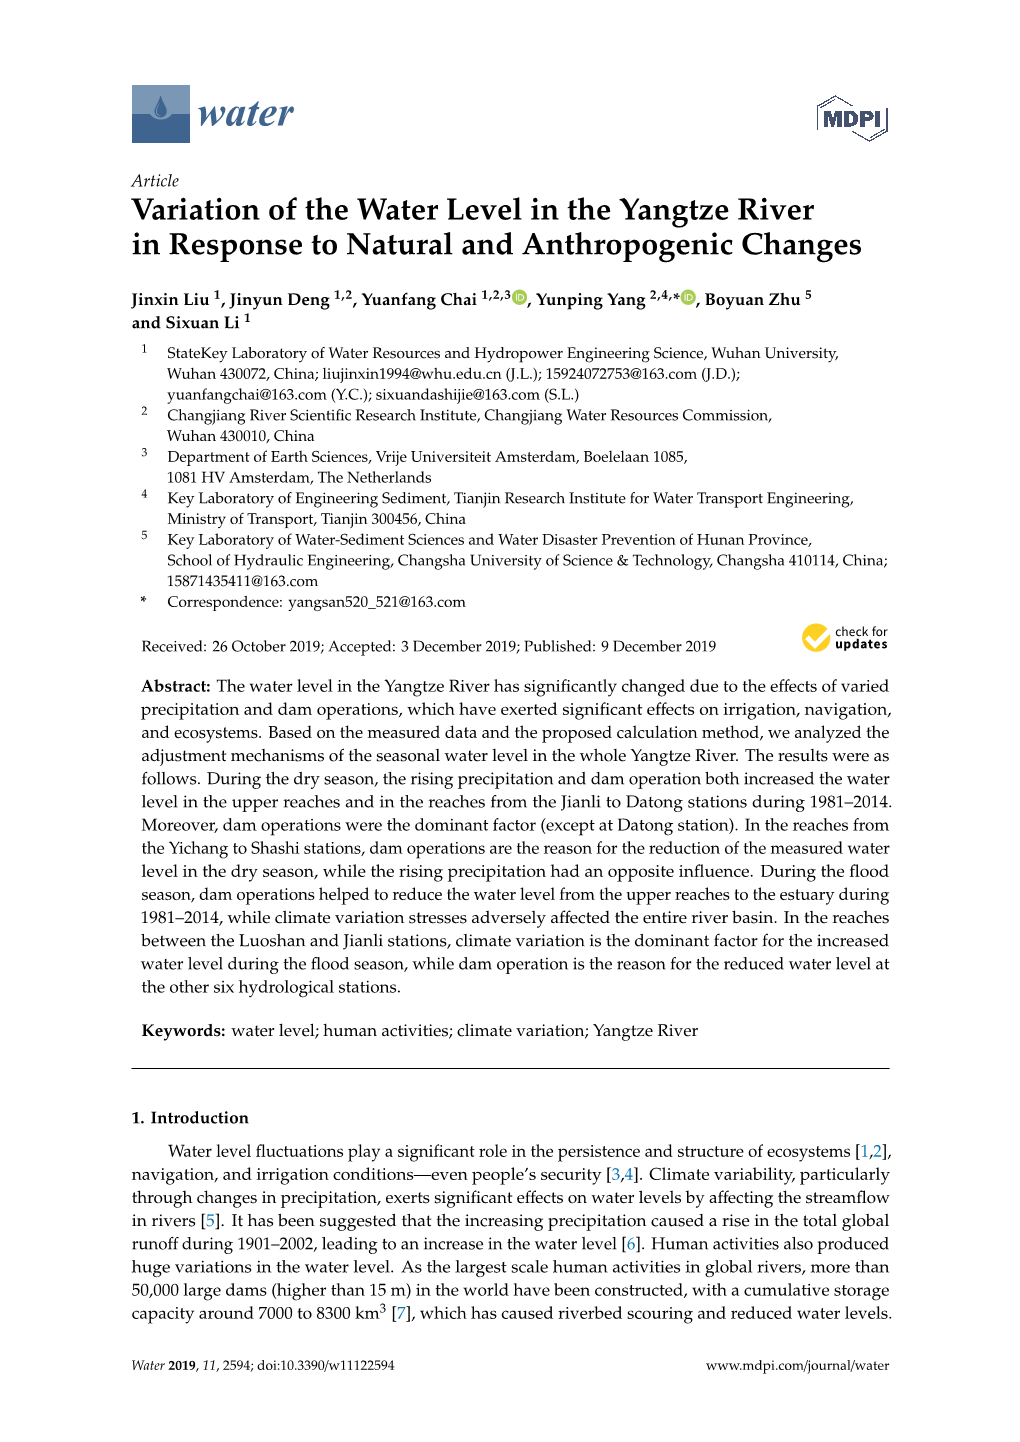 Variation of the Water Level in the Yangtze River in Response to Natural and Anthropogenic Changes